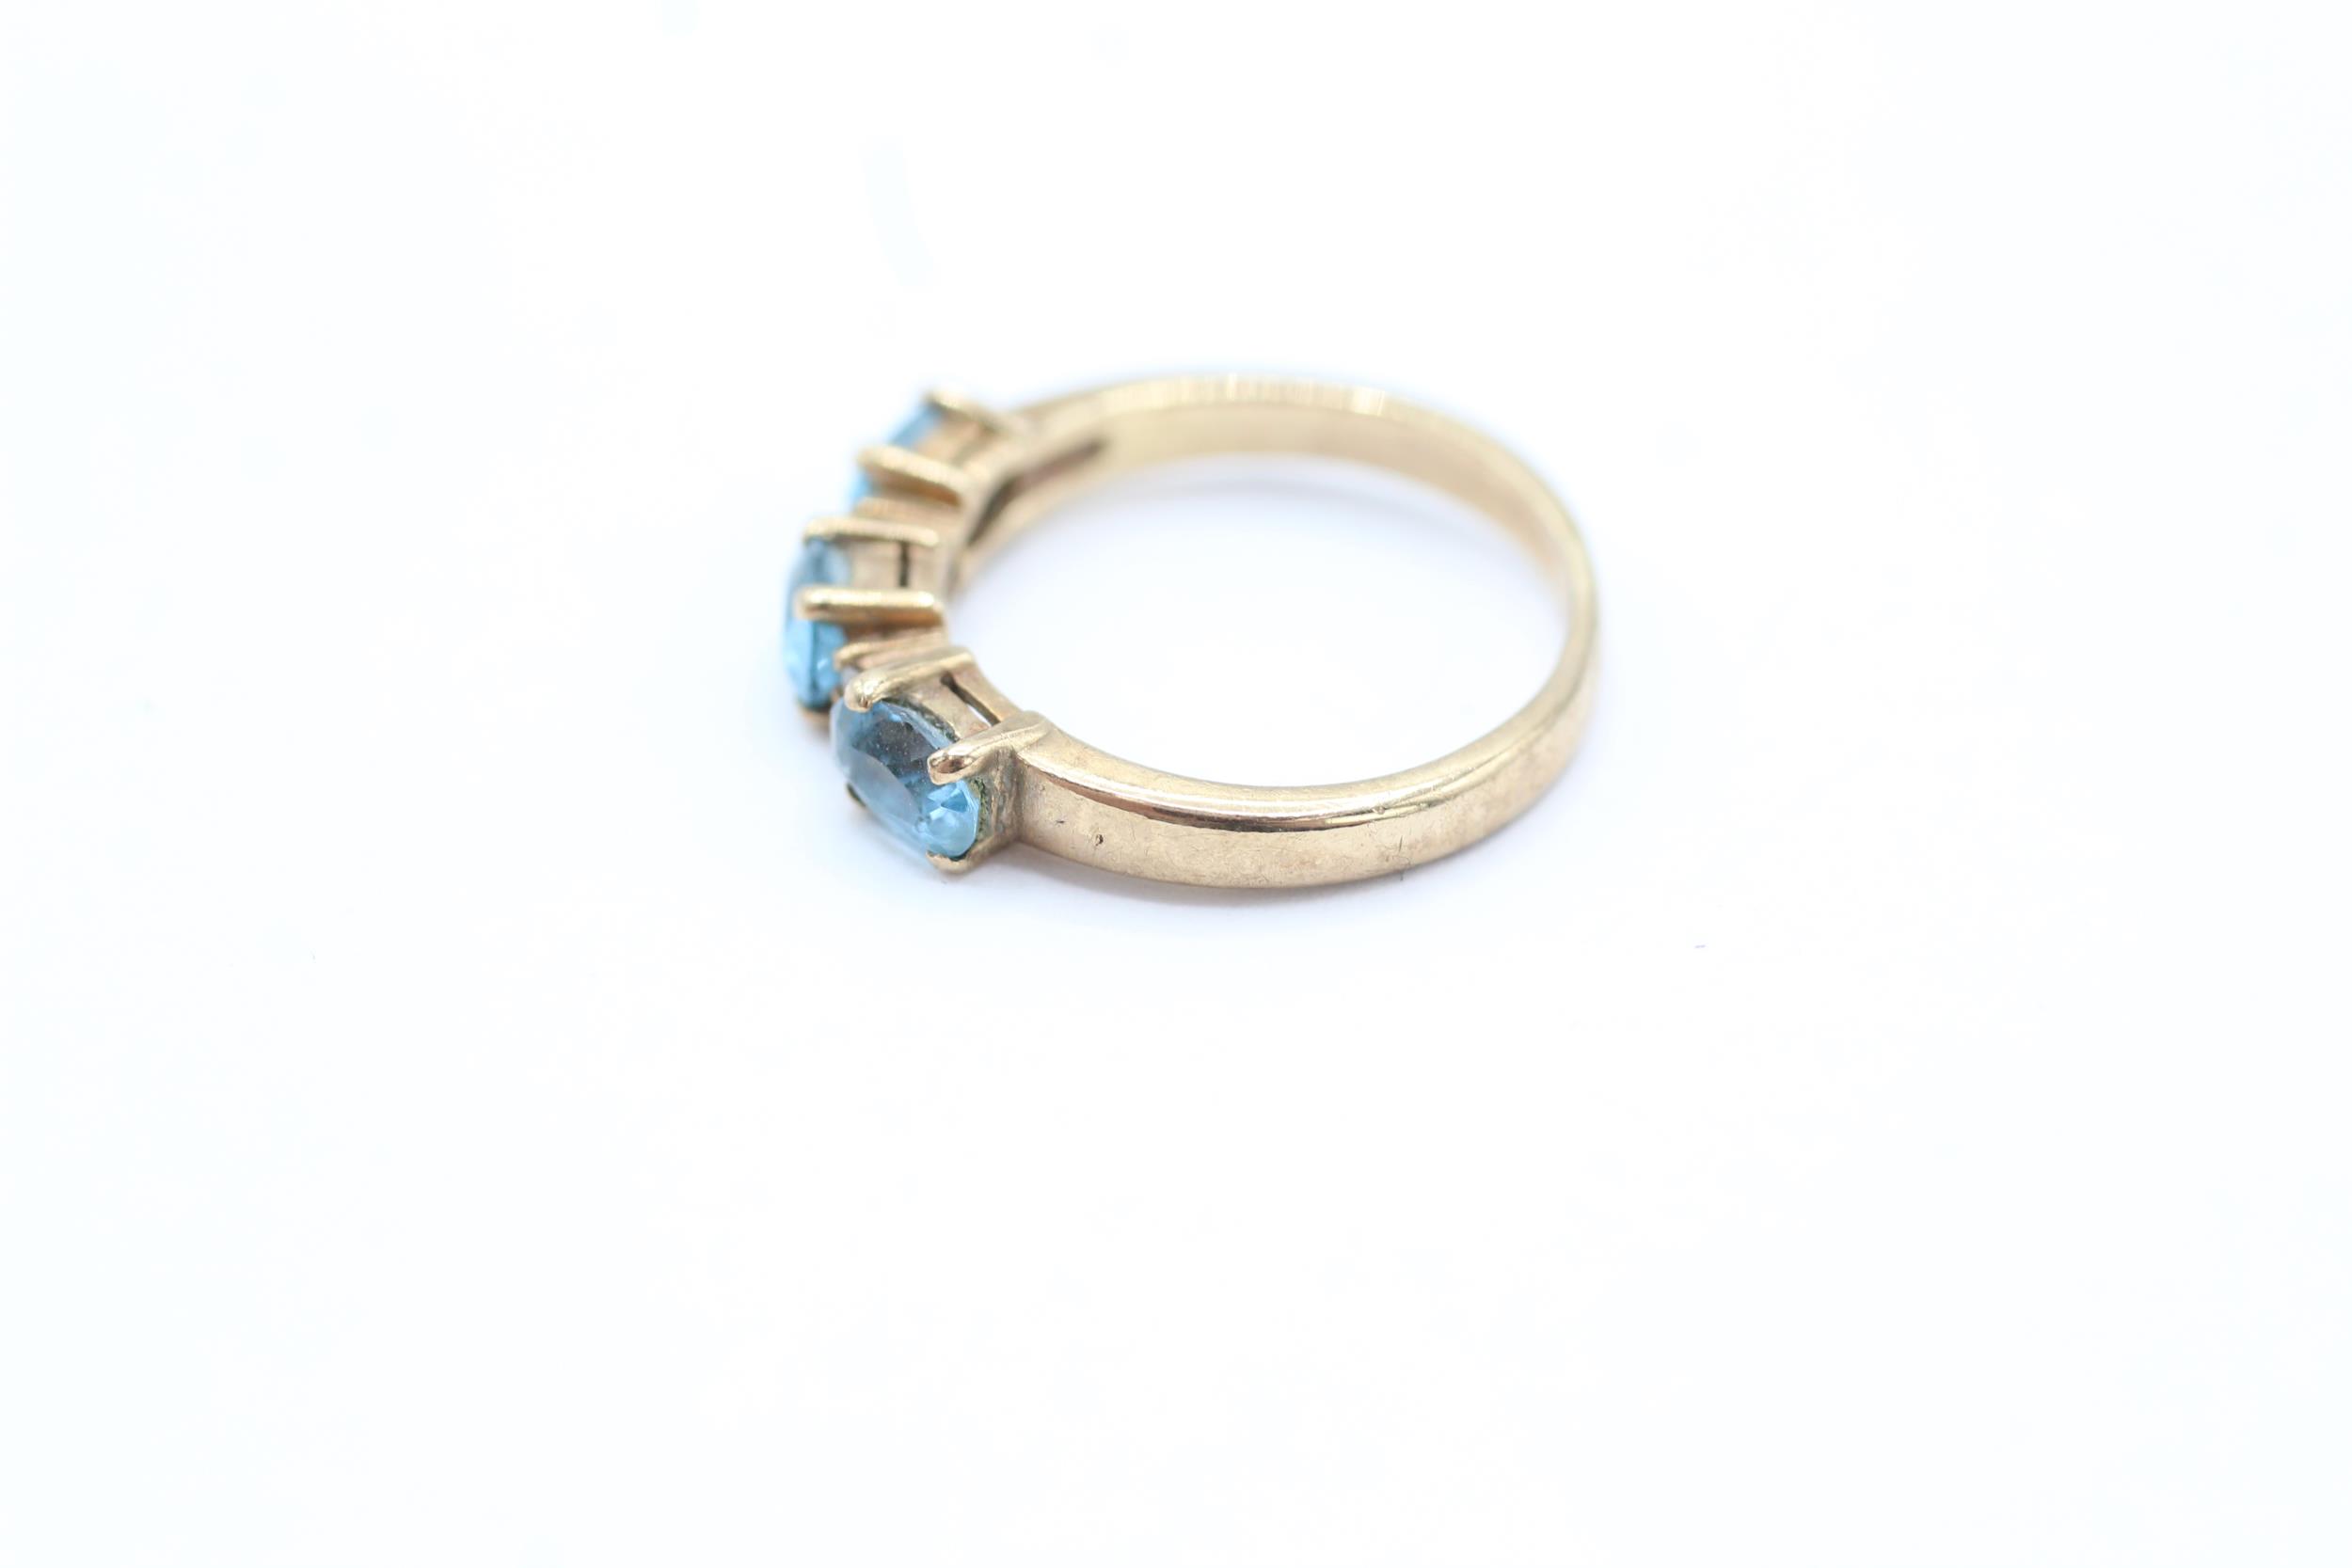 9ct gold blue topaz and diamond set band dress ring Size H 1/2 - 2 g - Image 4 of 4